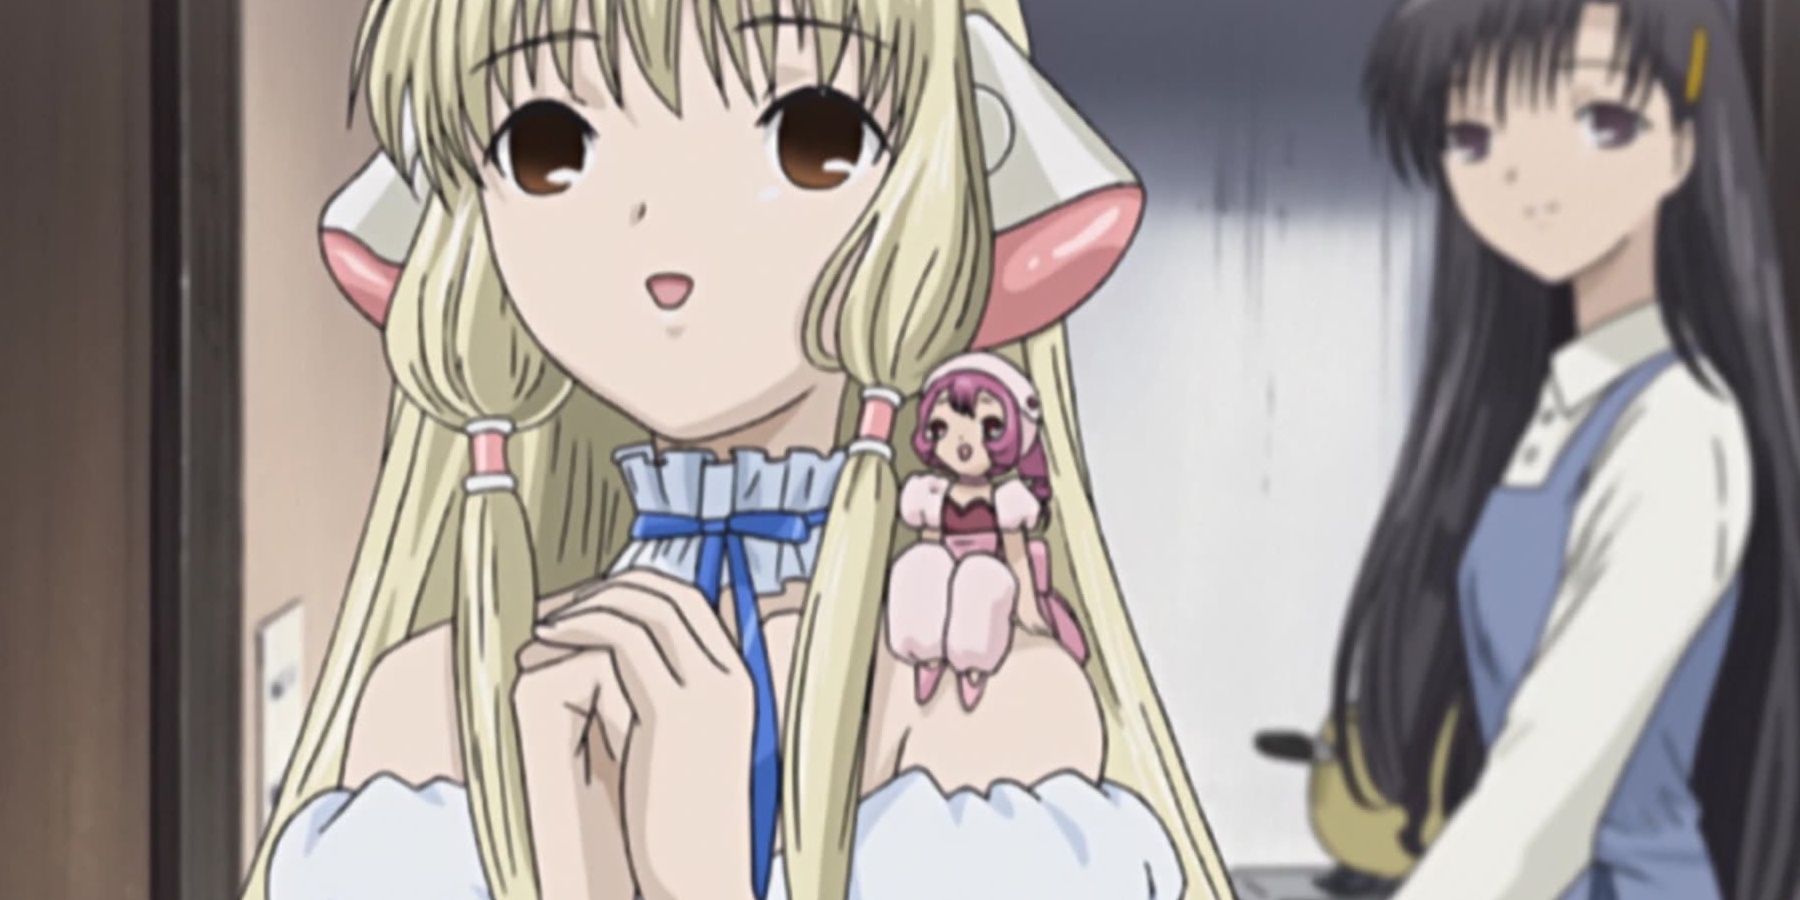 chii and sumomo from chobits